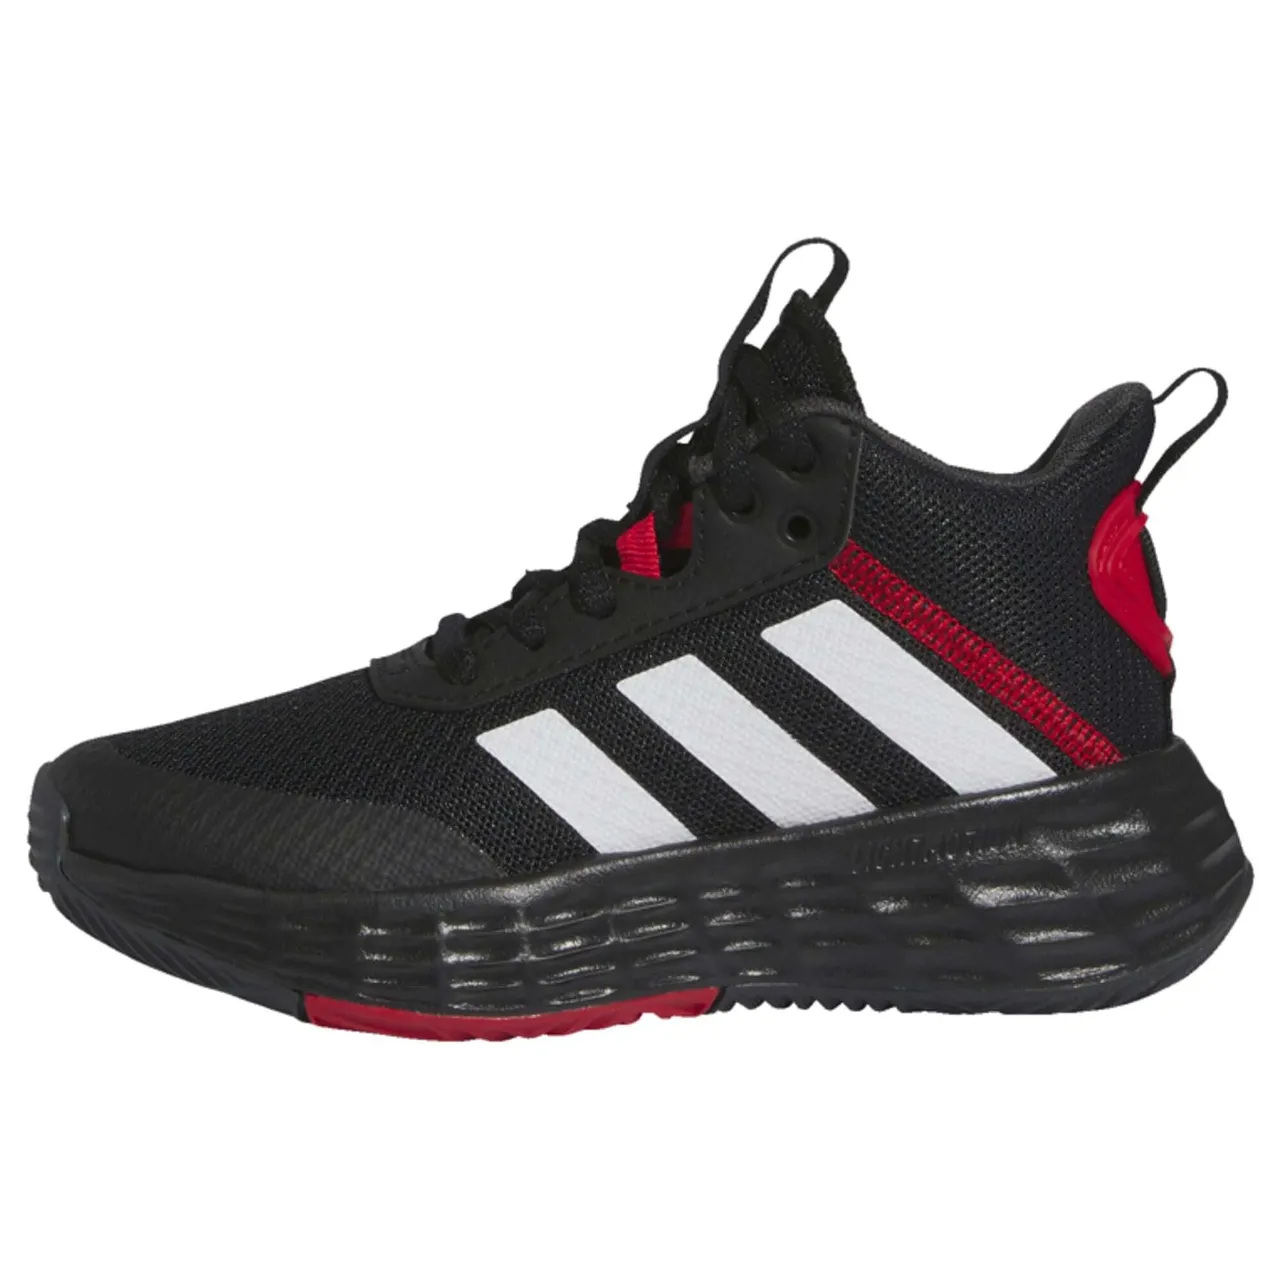 adidas Ownthegame 2.0 Shoes Sneaker